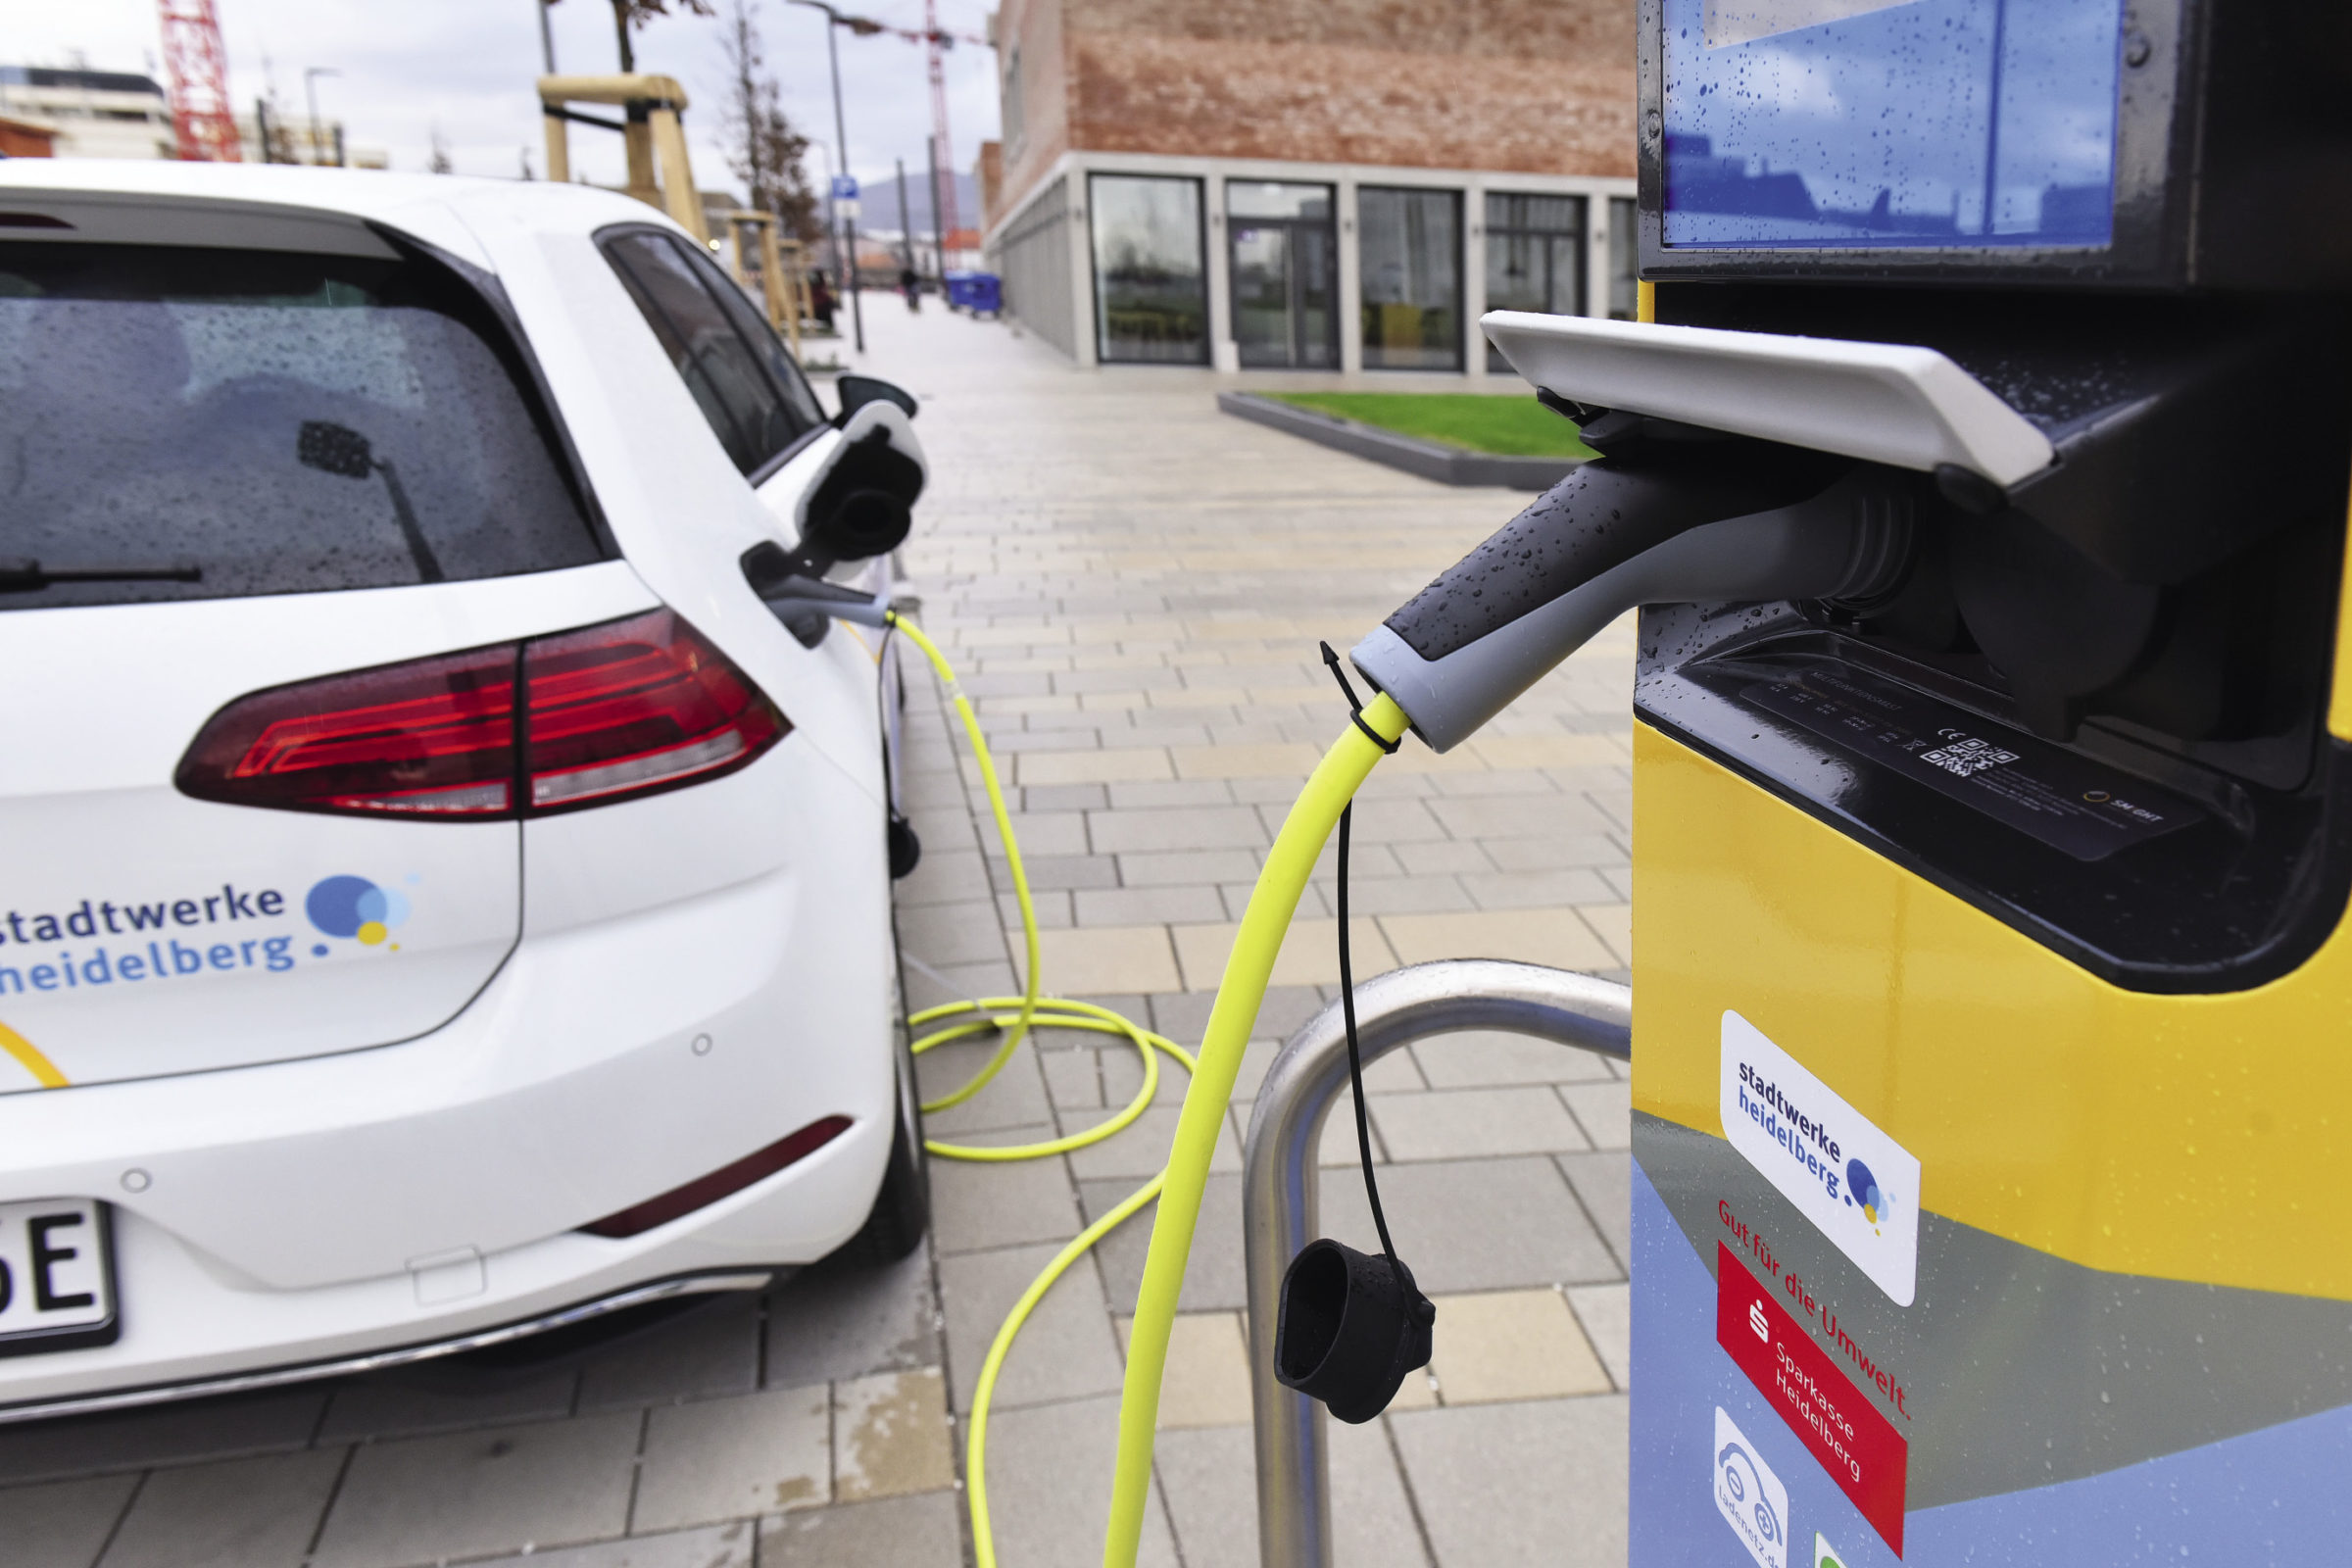 Electric vehicle announcements point way ahead for UK transport with